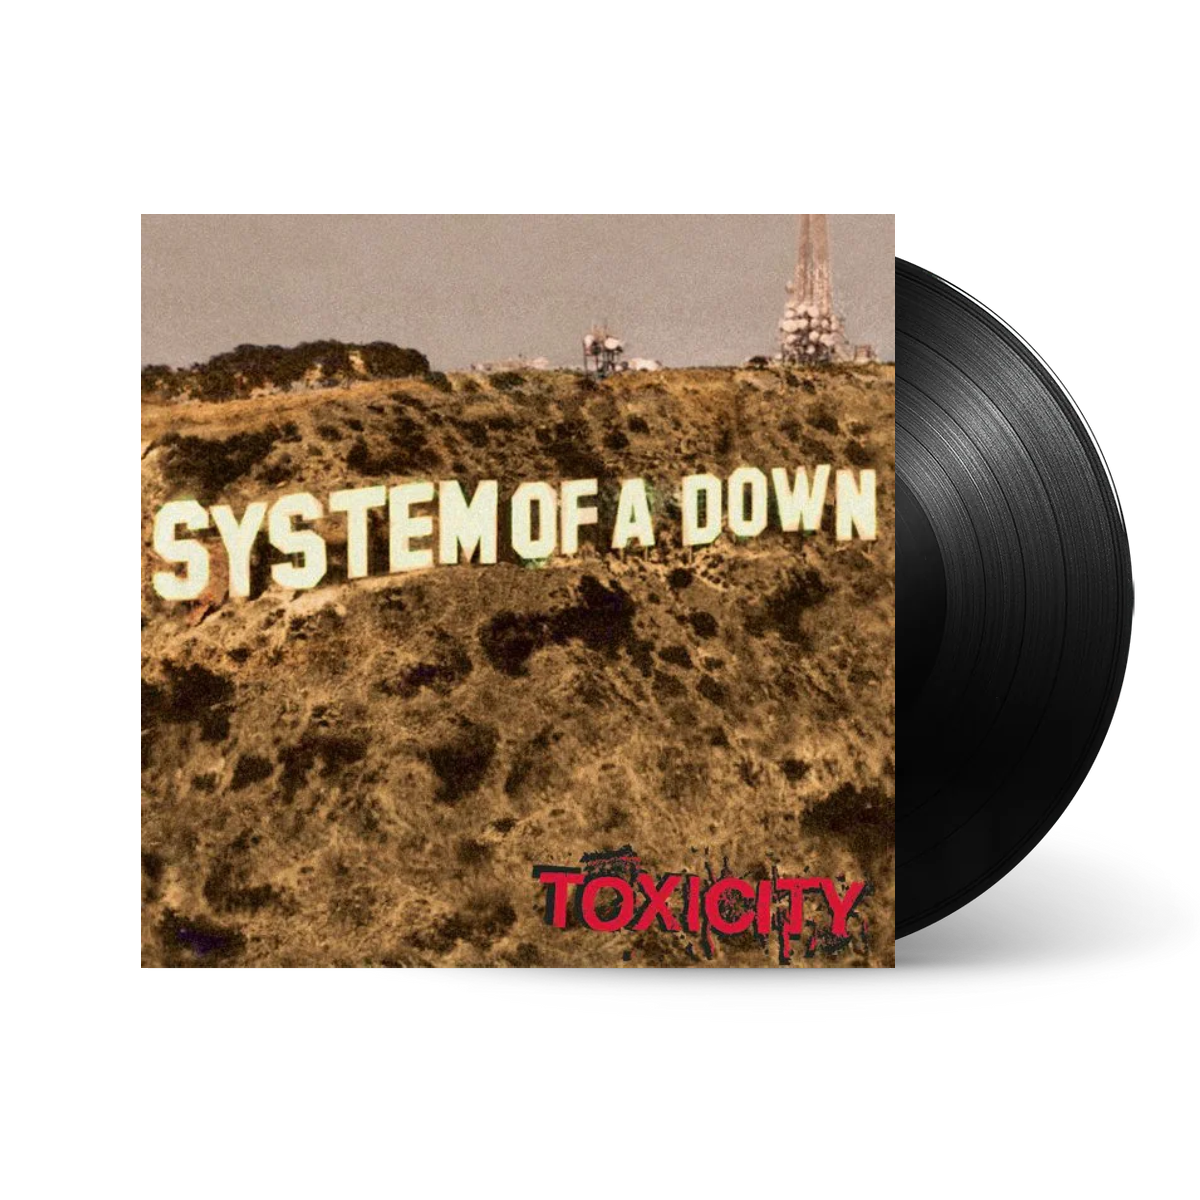 System Of A Down - Toxicity: Vinyl LP